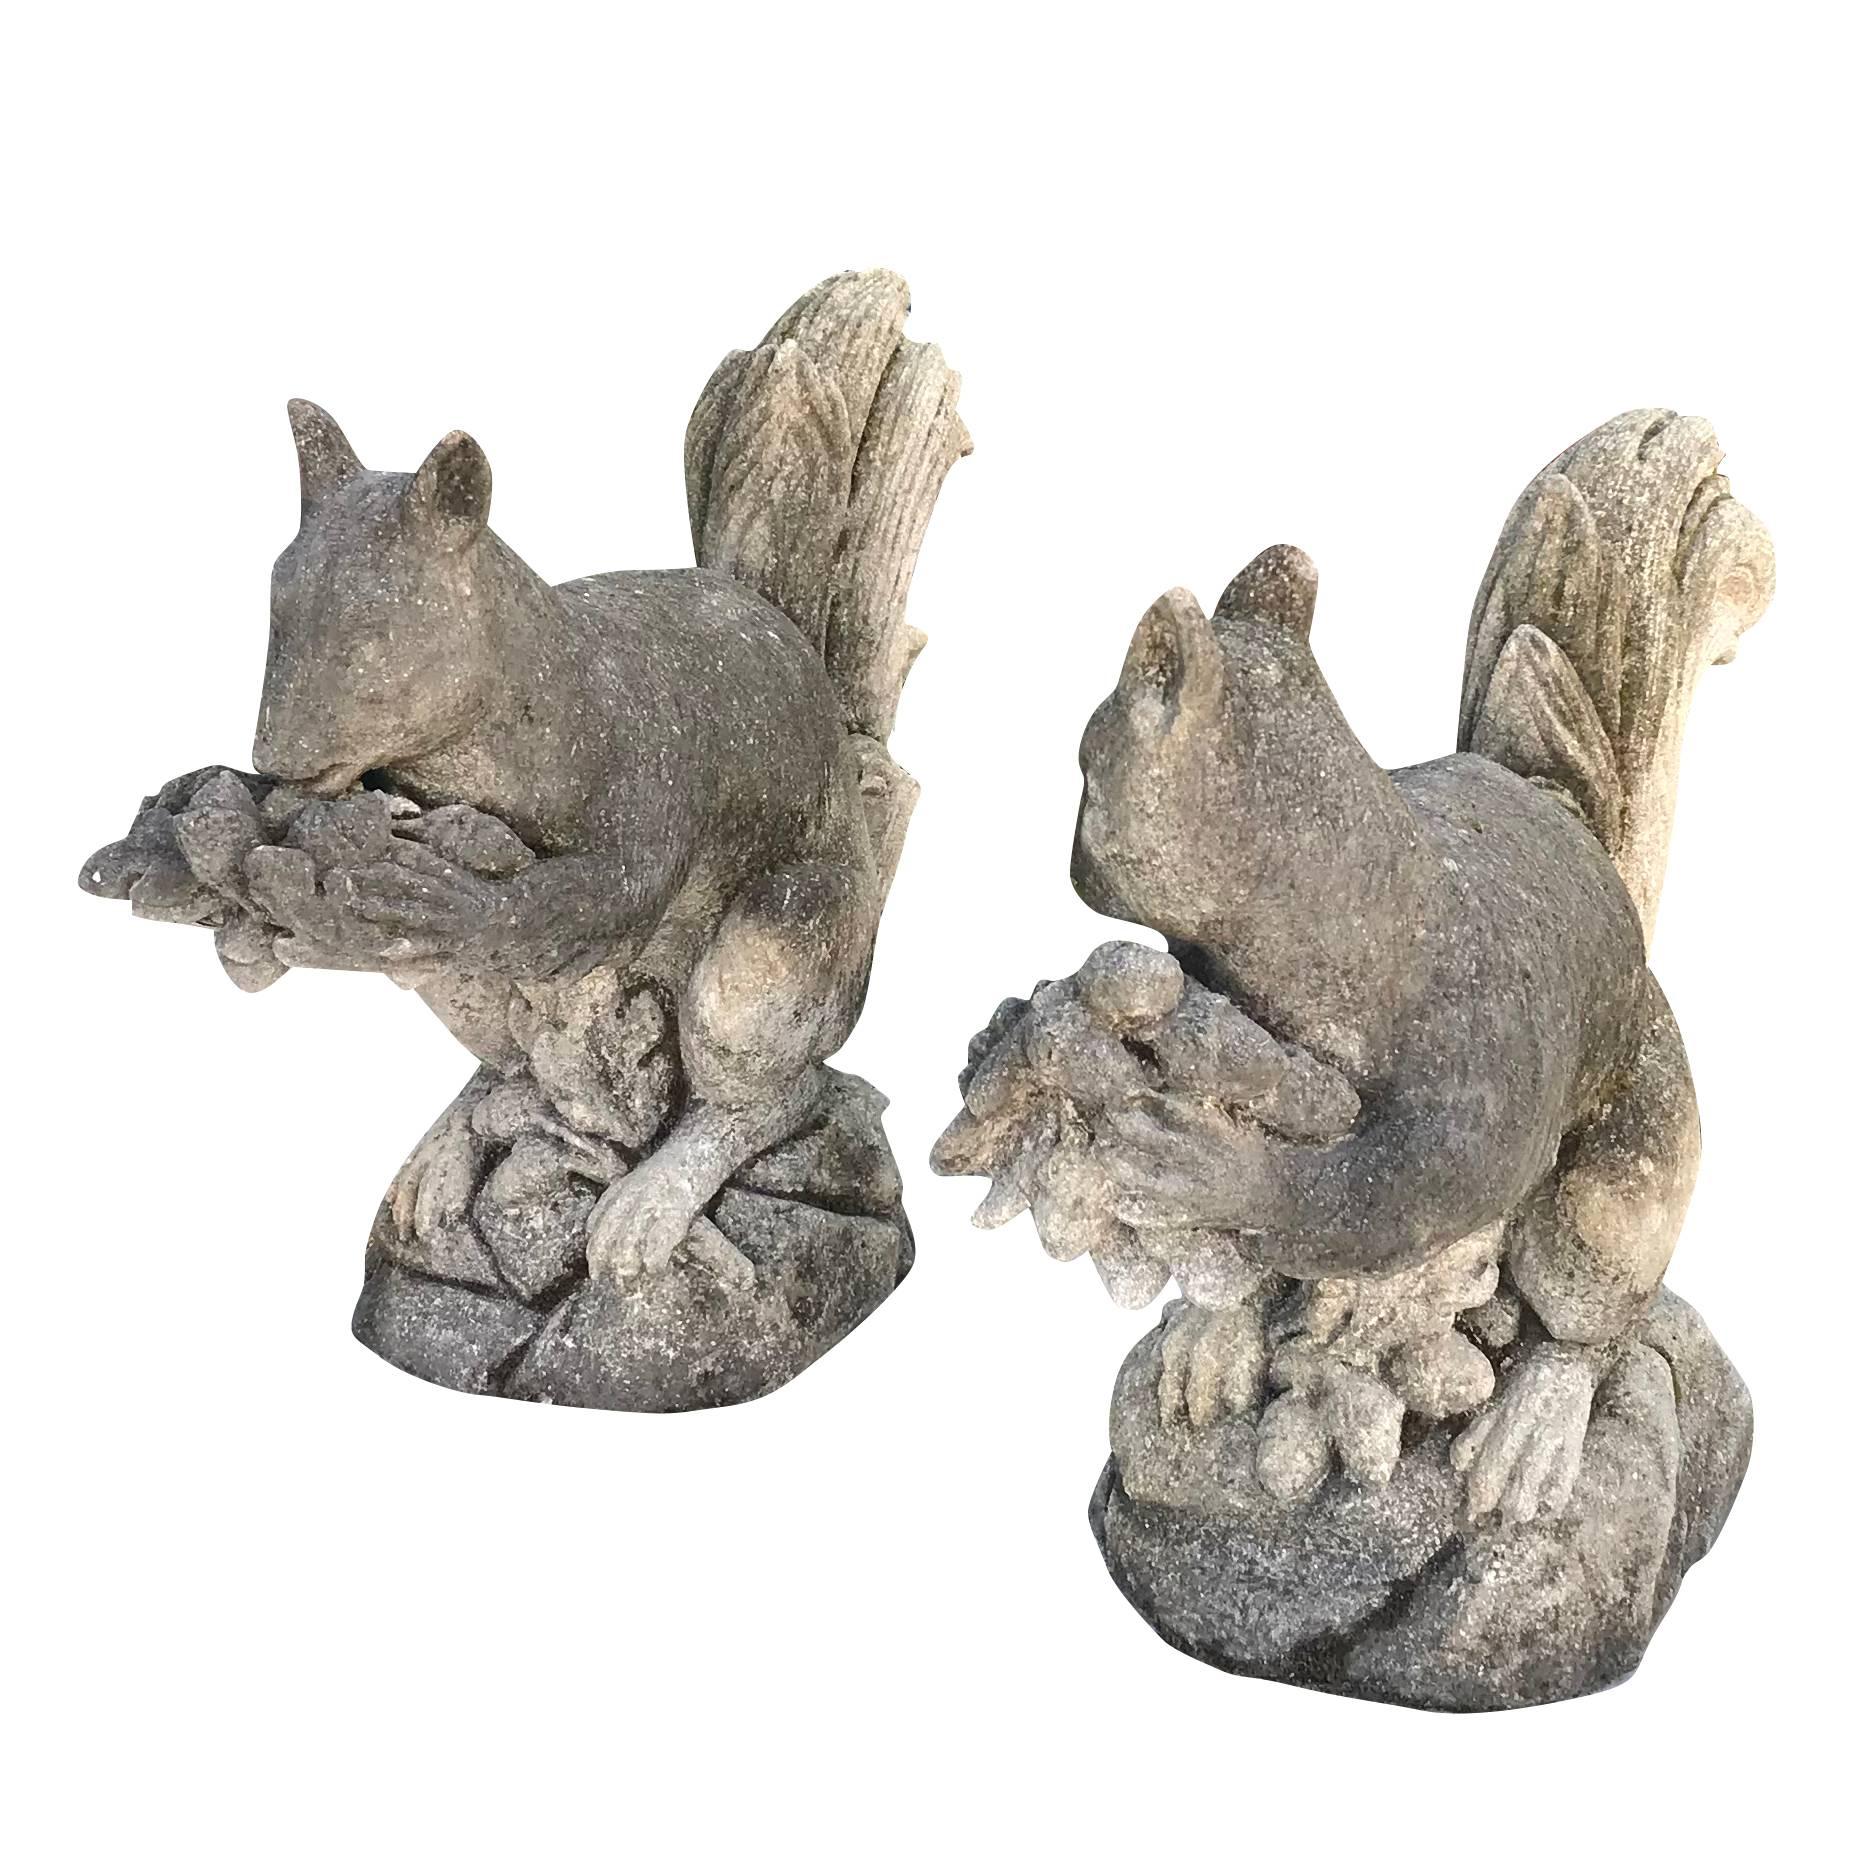 A detailed of a pair of squirrels facing in different directions and eating, circa 1960. Carving in Limestone carved by hand in Italian limestone.